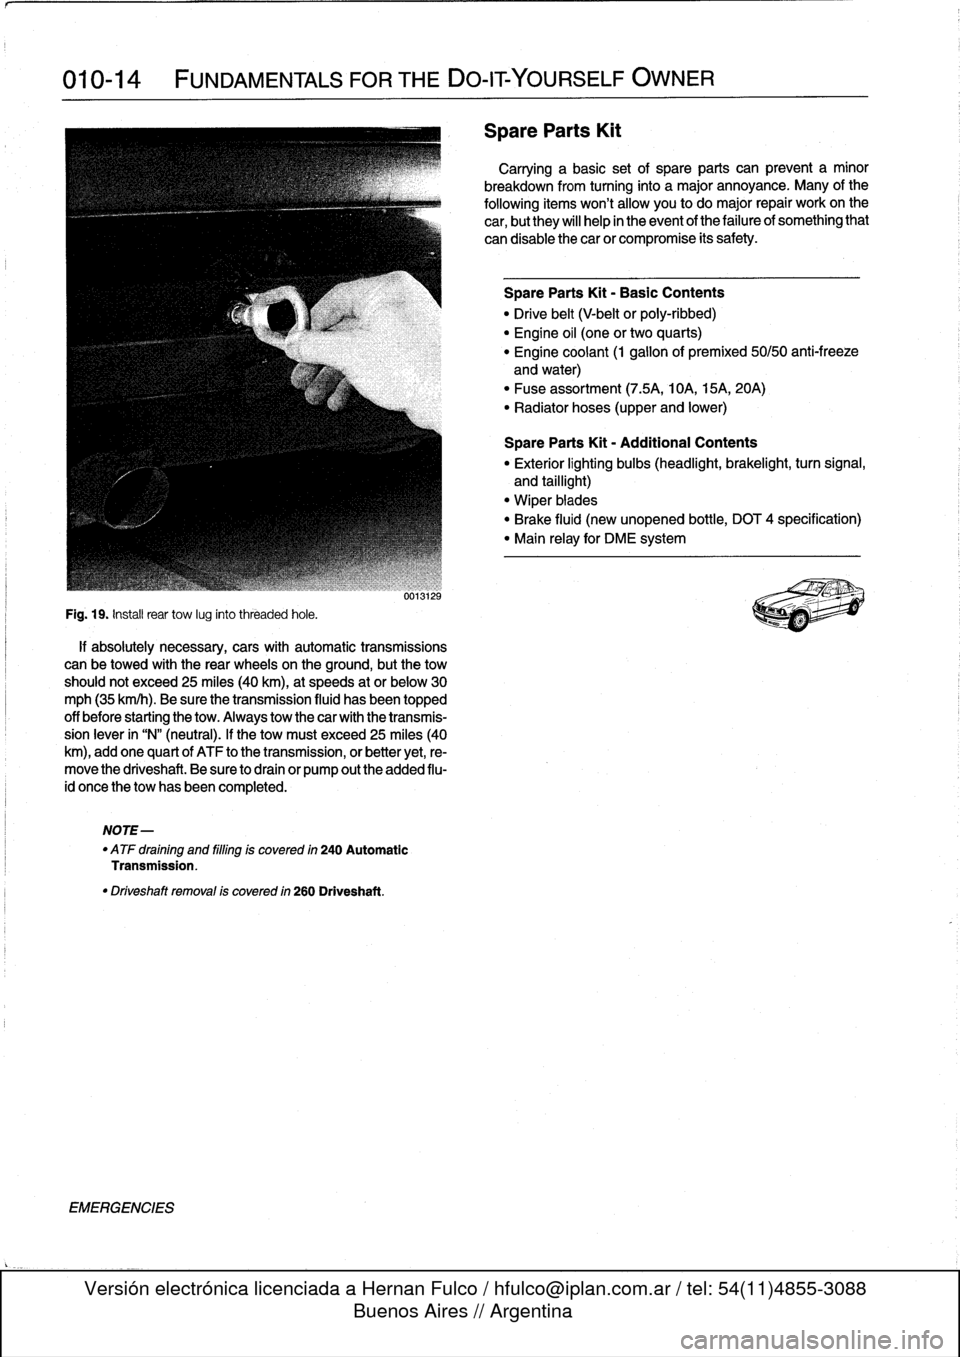 BMW 318i 1995 E36 Workshop Manual 
010-14

	

FUNDAMENTALS
FOR
THE
DO-ITYOURSELF
OWNER

Fig
.
19
.
Instaf
rear
tow
lug
into
threaded
hole
.

if
absolutely
necessary,
cars
with
automatic
transmissions
can
be
towed
with
the
rear
wheels
